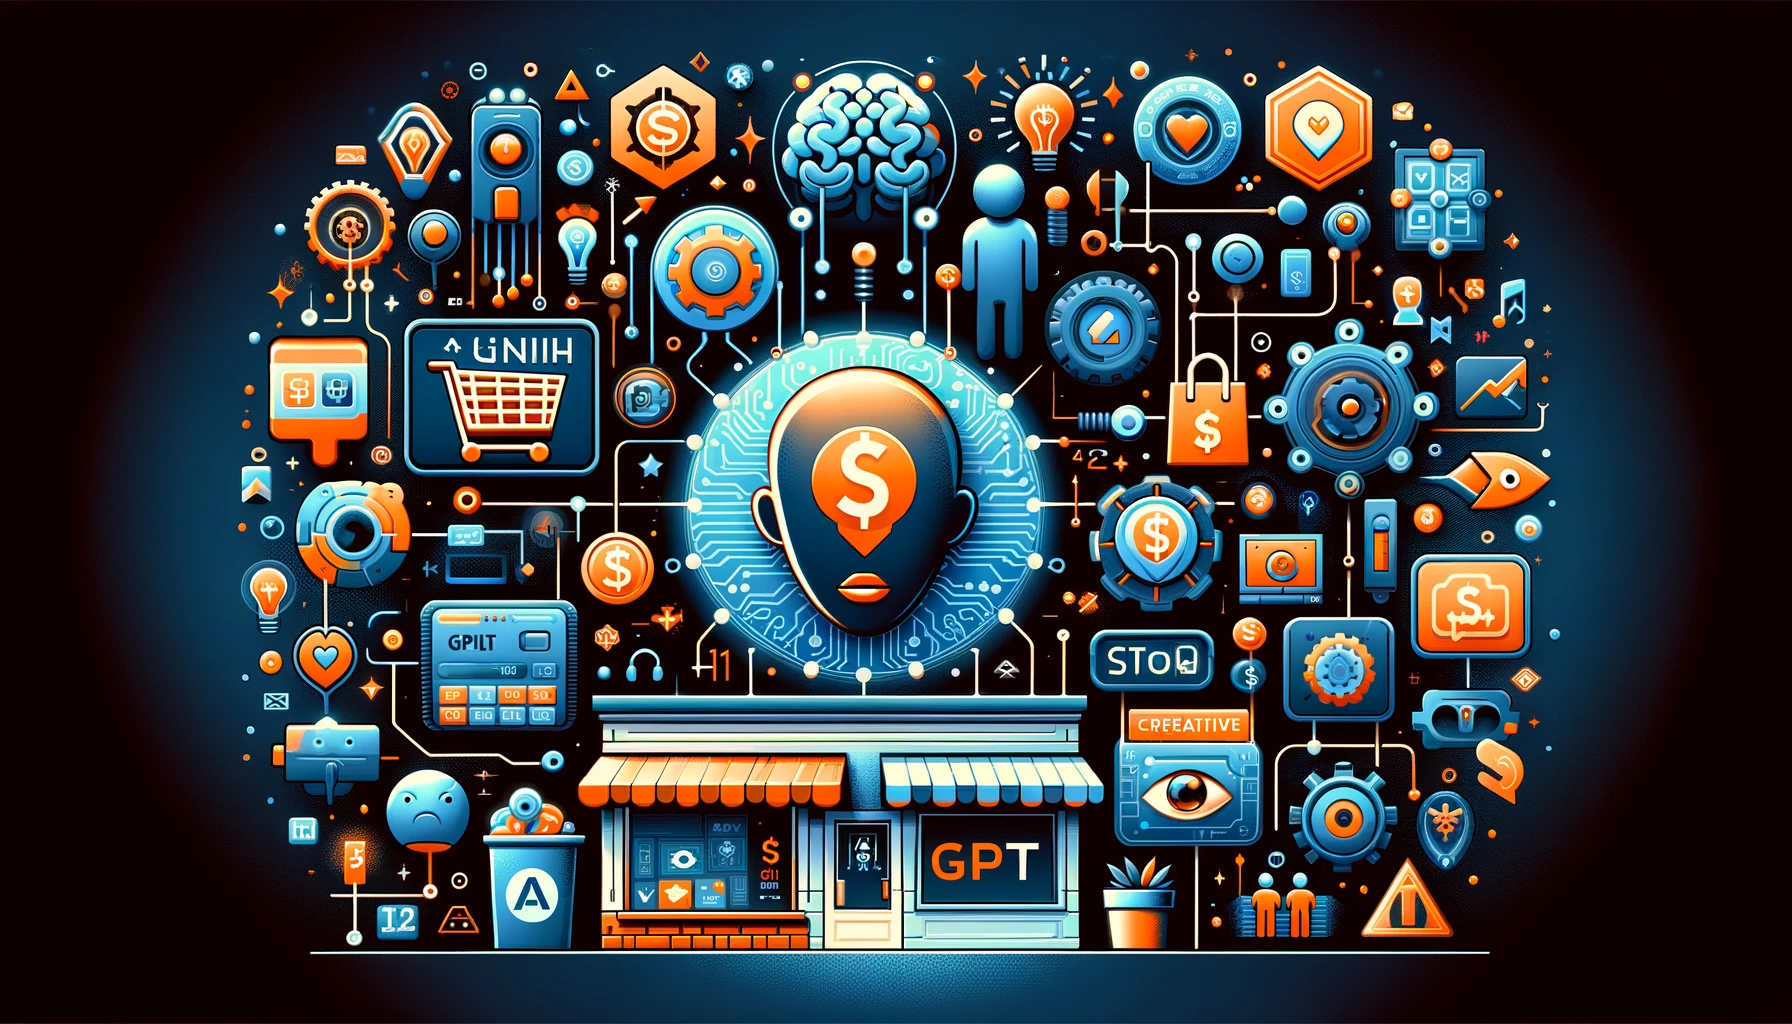 Futuristic illustration of AI and economic elements with a central figure symbolizing monetization opportunities in AI technology, surrounded by gears, circuits, and financial icons.